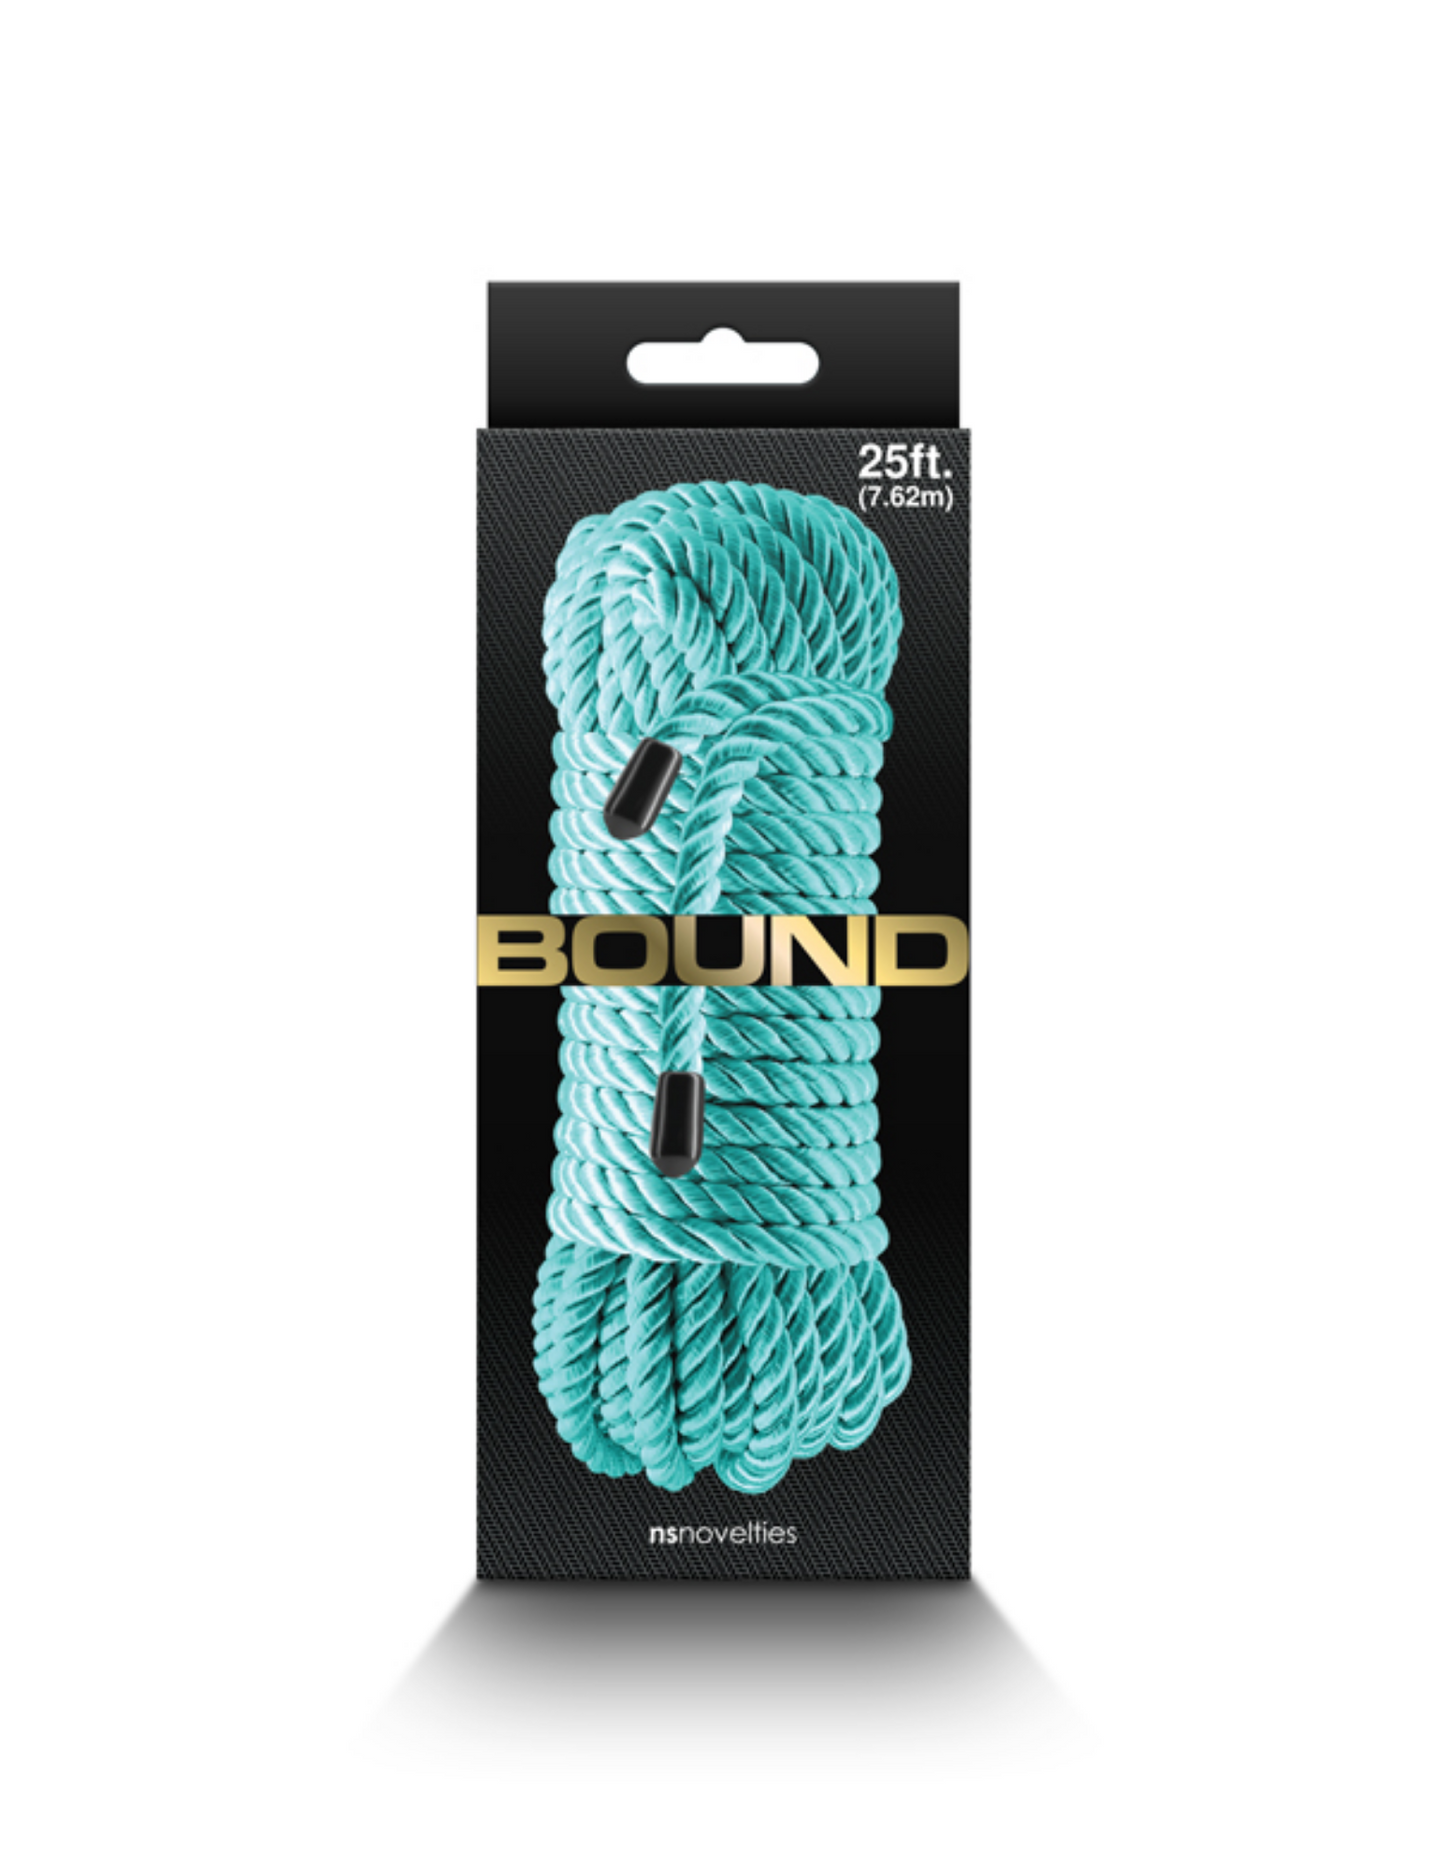 Photo of the box for the Bound Rope from NS Novelties (green).